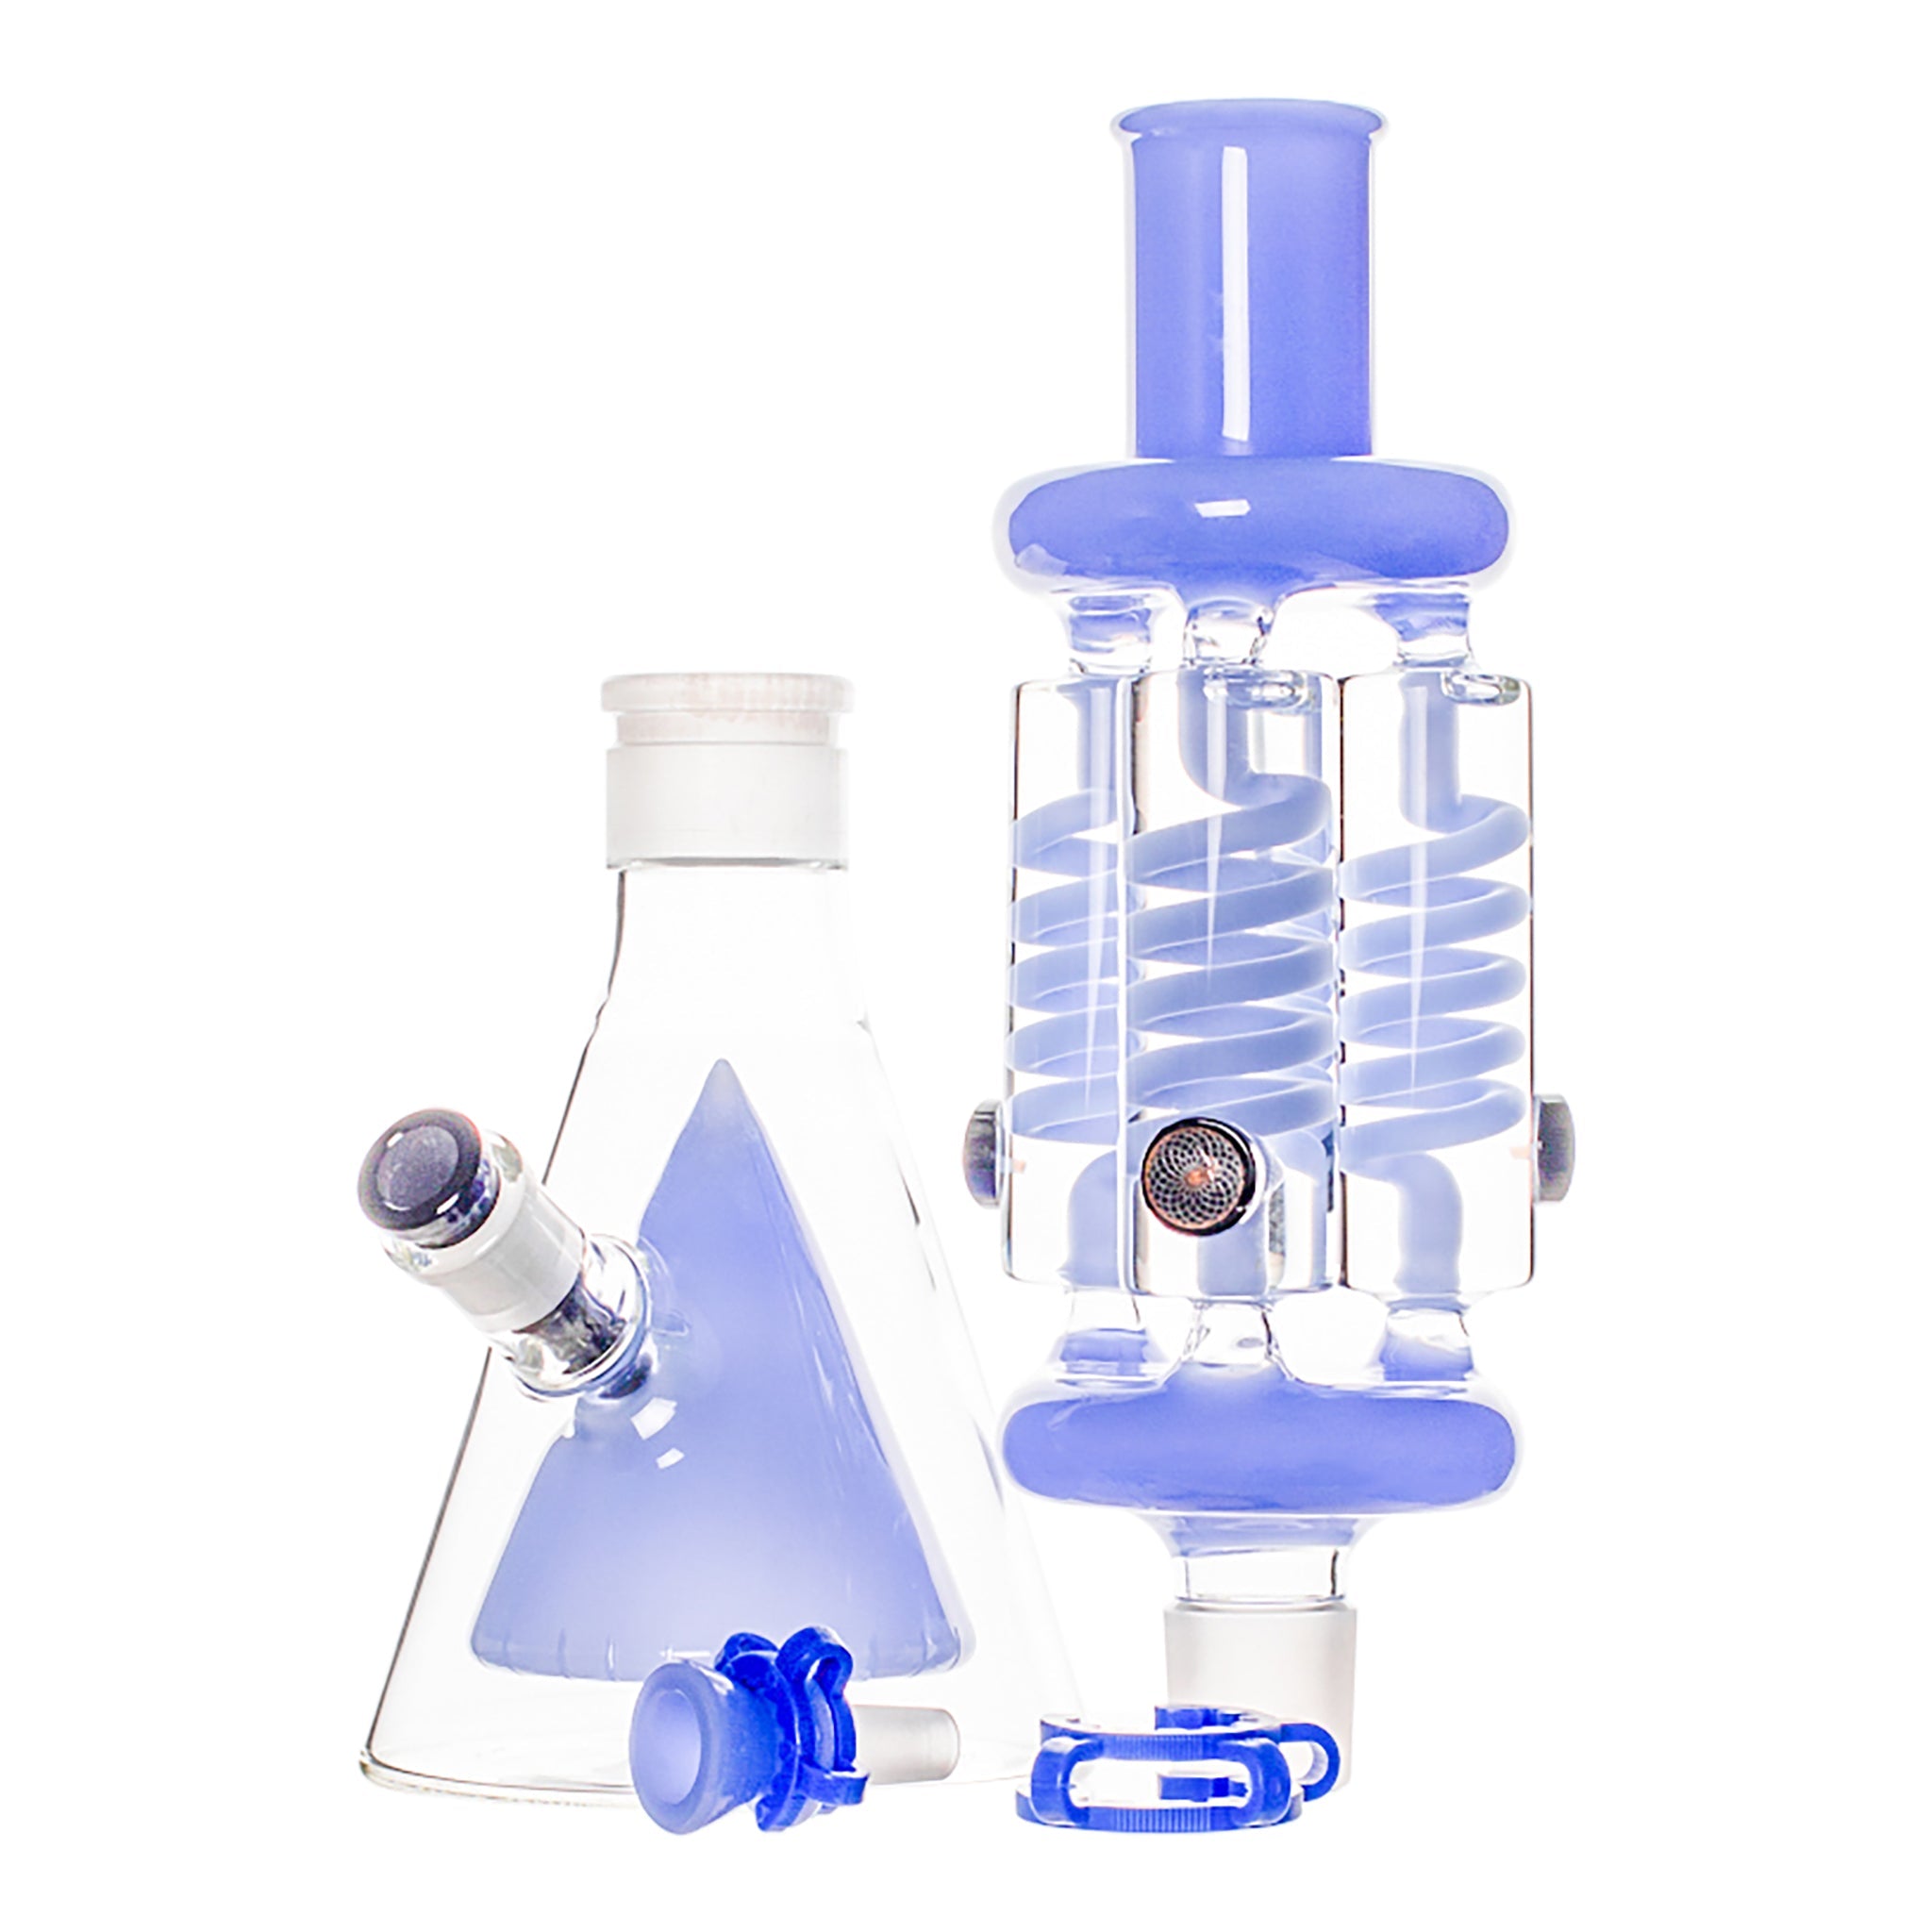 Triple Helix Glyco Chill Bong - 19in Bong Amy 